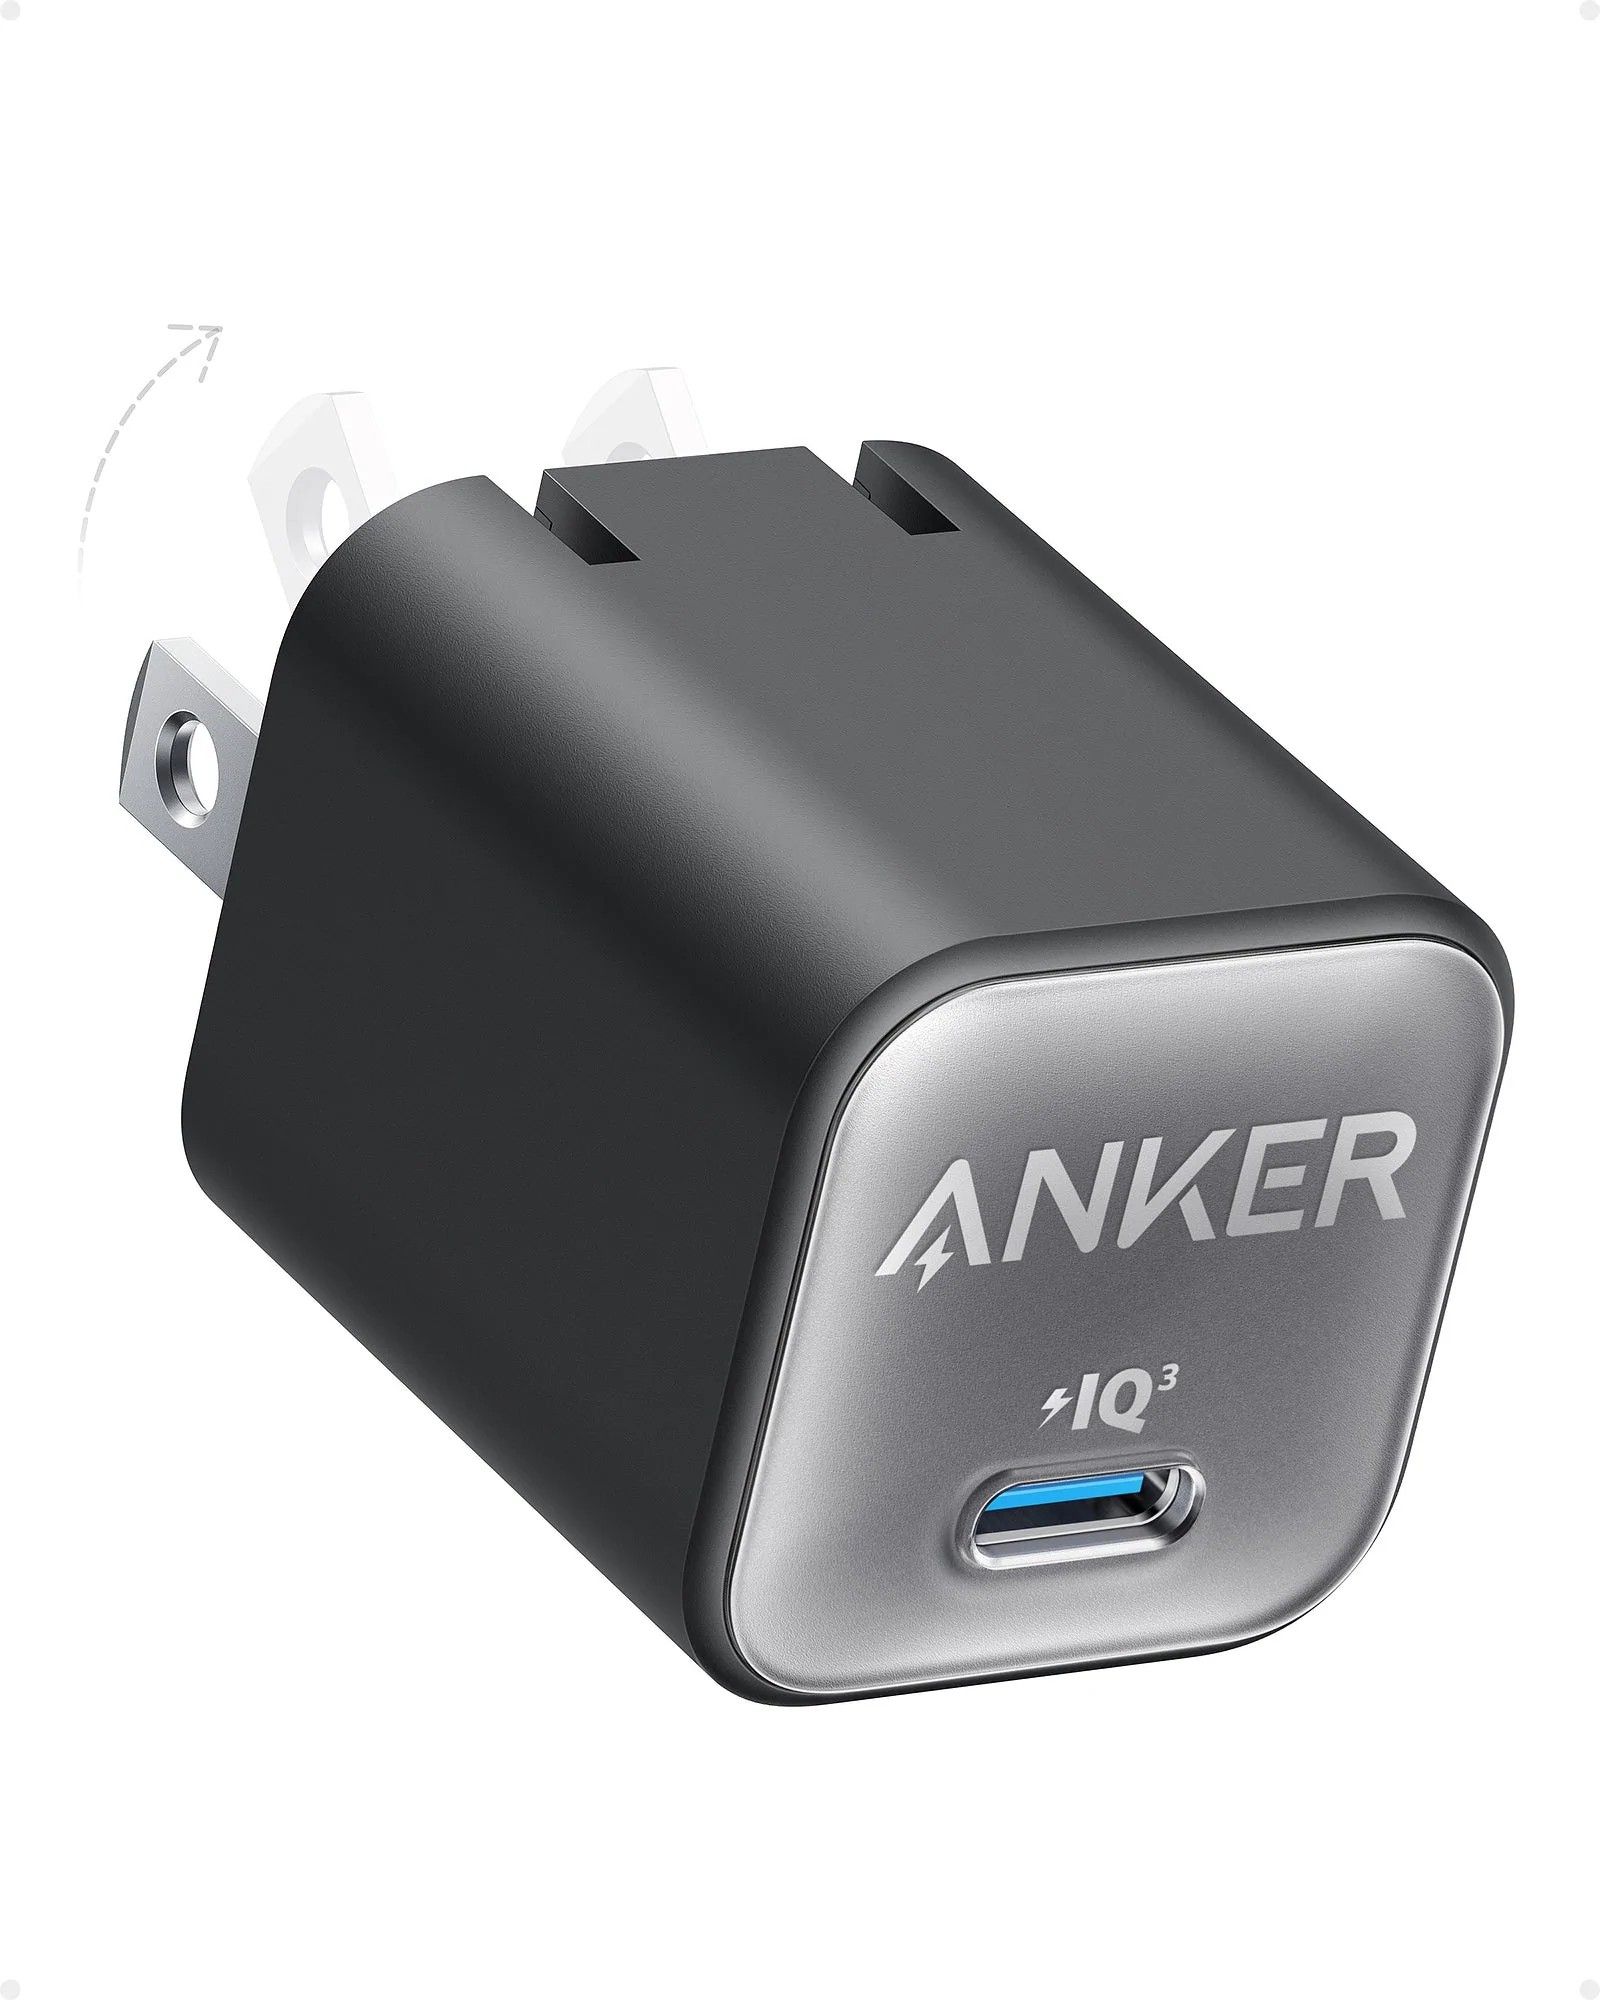 Anker 511 Charger